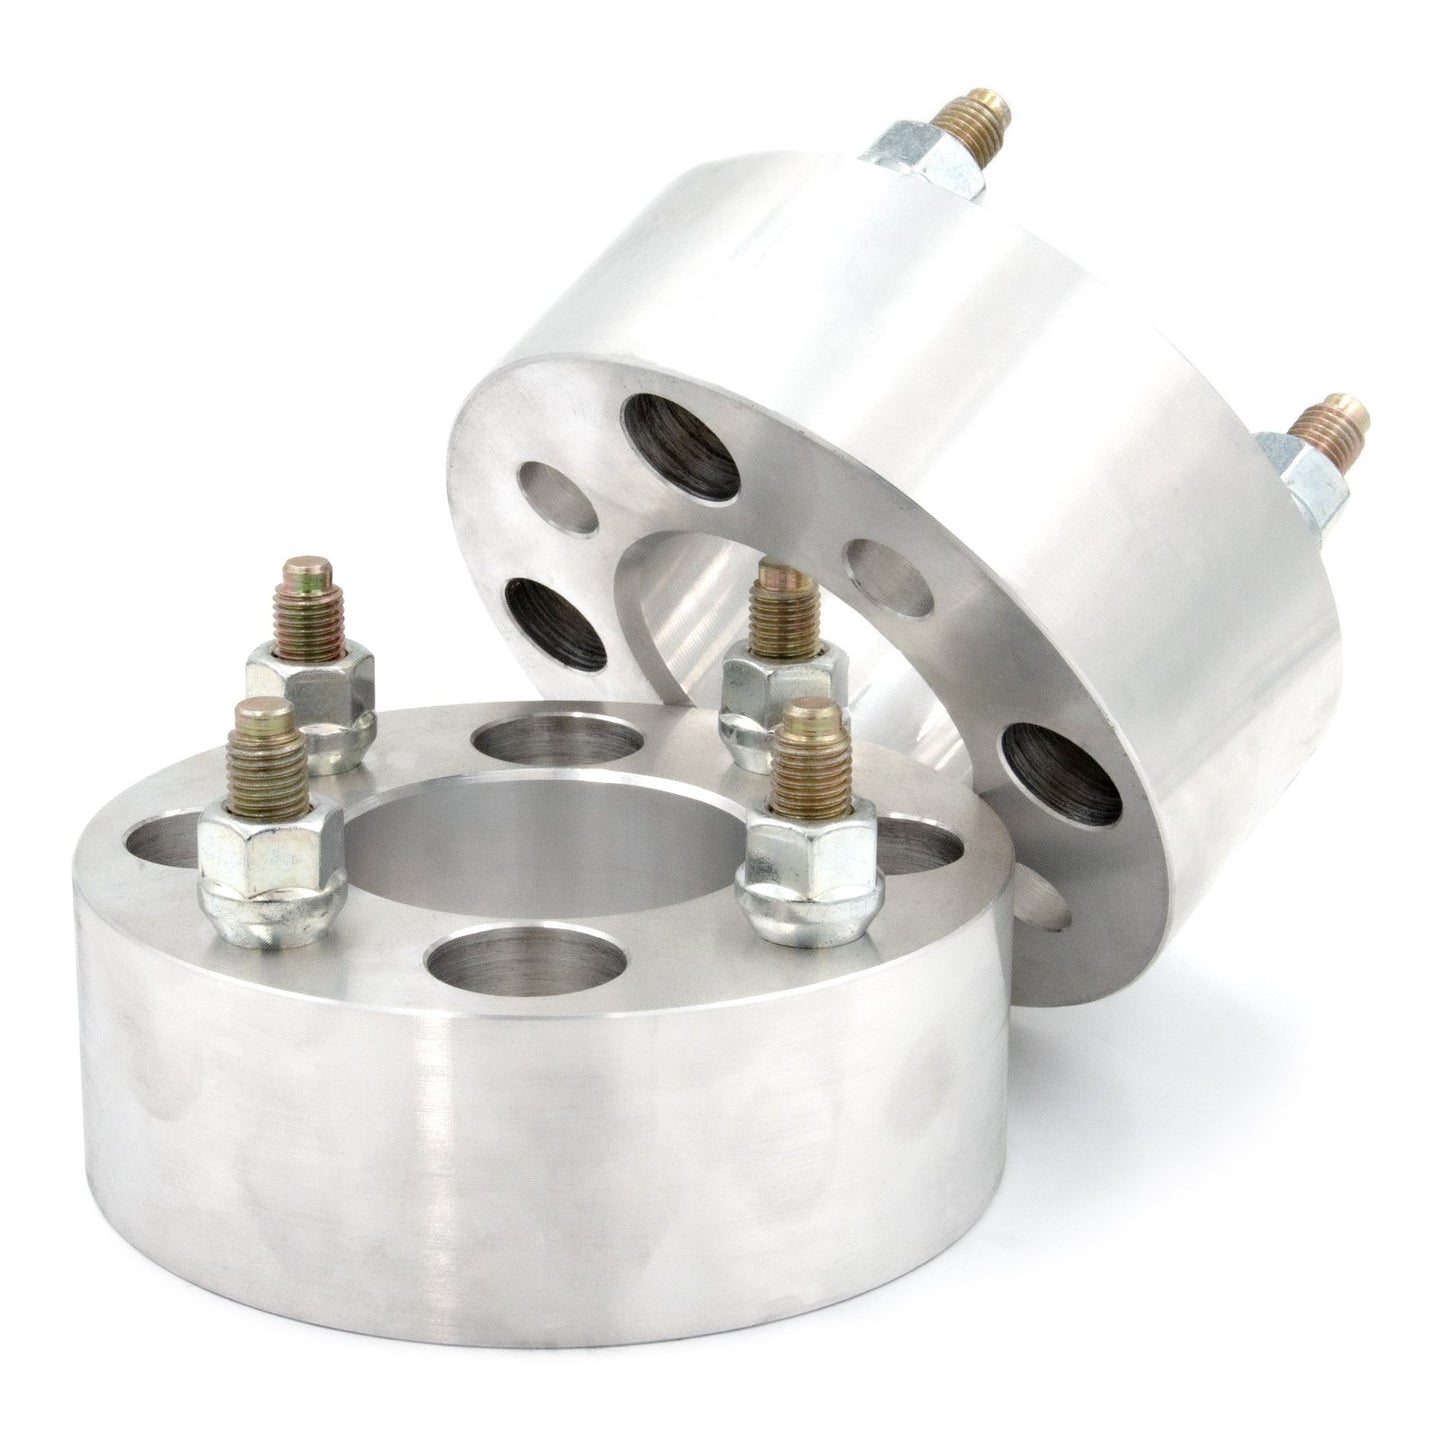 4x140 to 4x140 Wheel Spacer/Adapter - Thickness: 3/4"- 4"